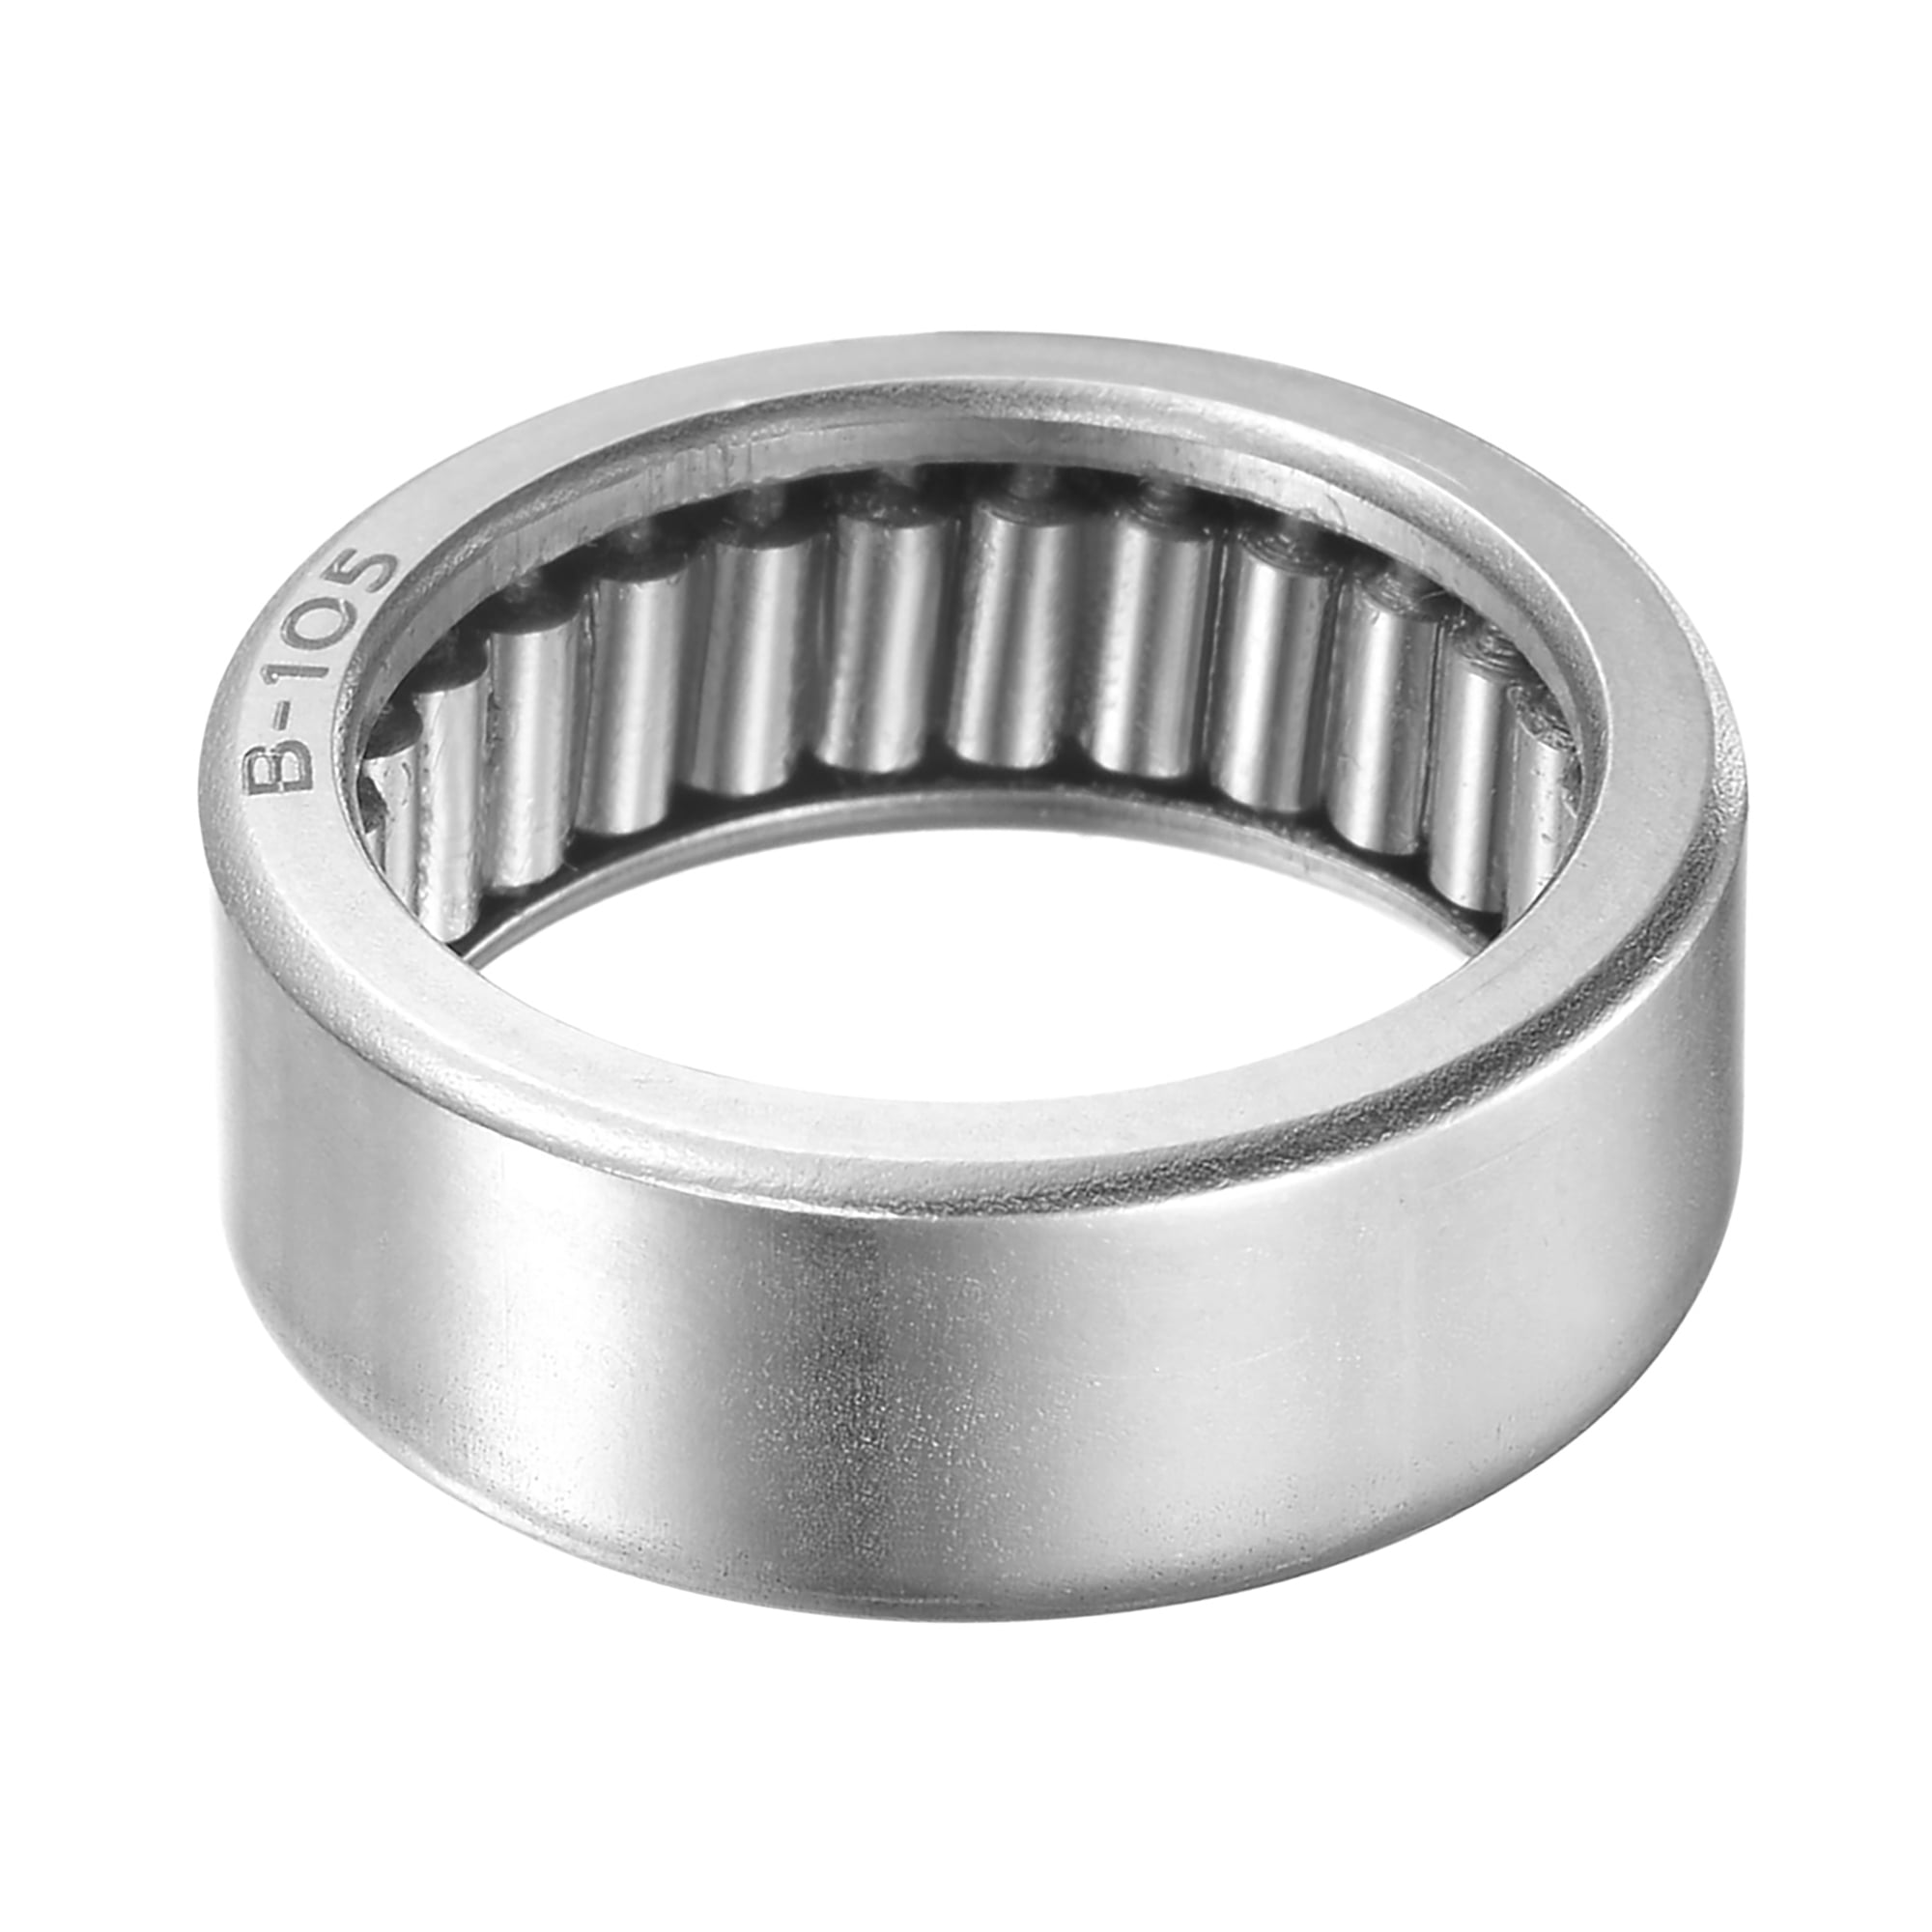 Details about   B105 Needle Roller Bearings 5/8"x13/16"x5/16" Open Full Complement Drawn Cup 